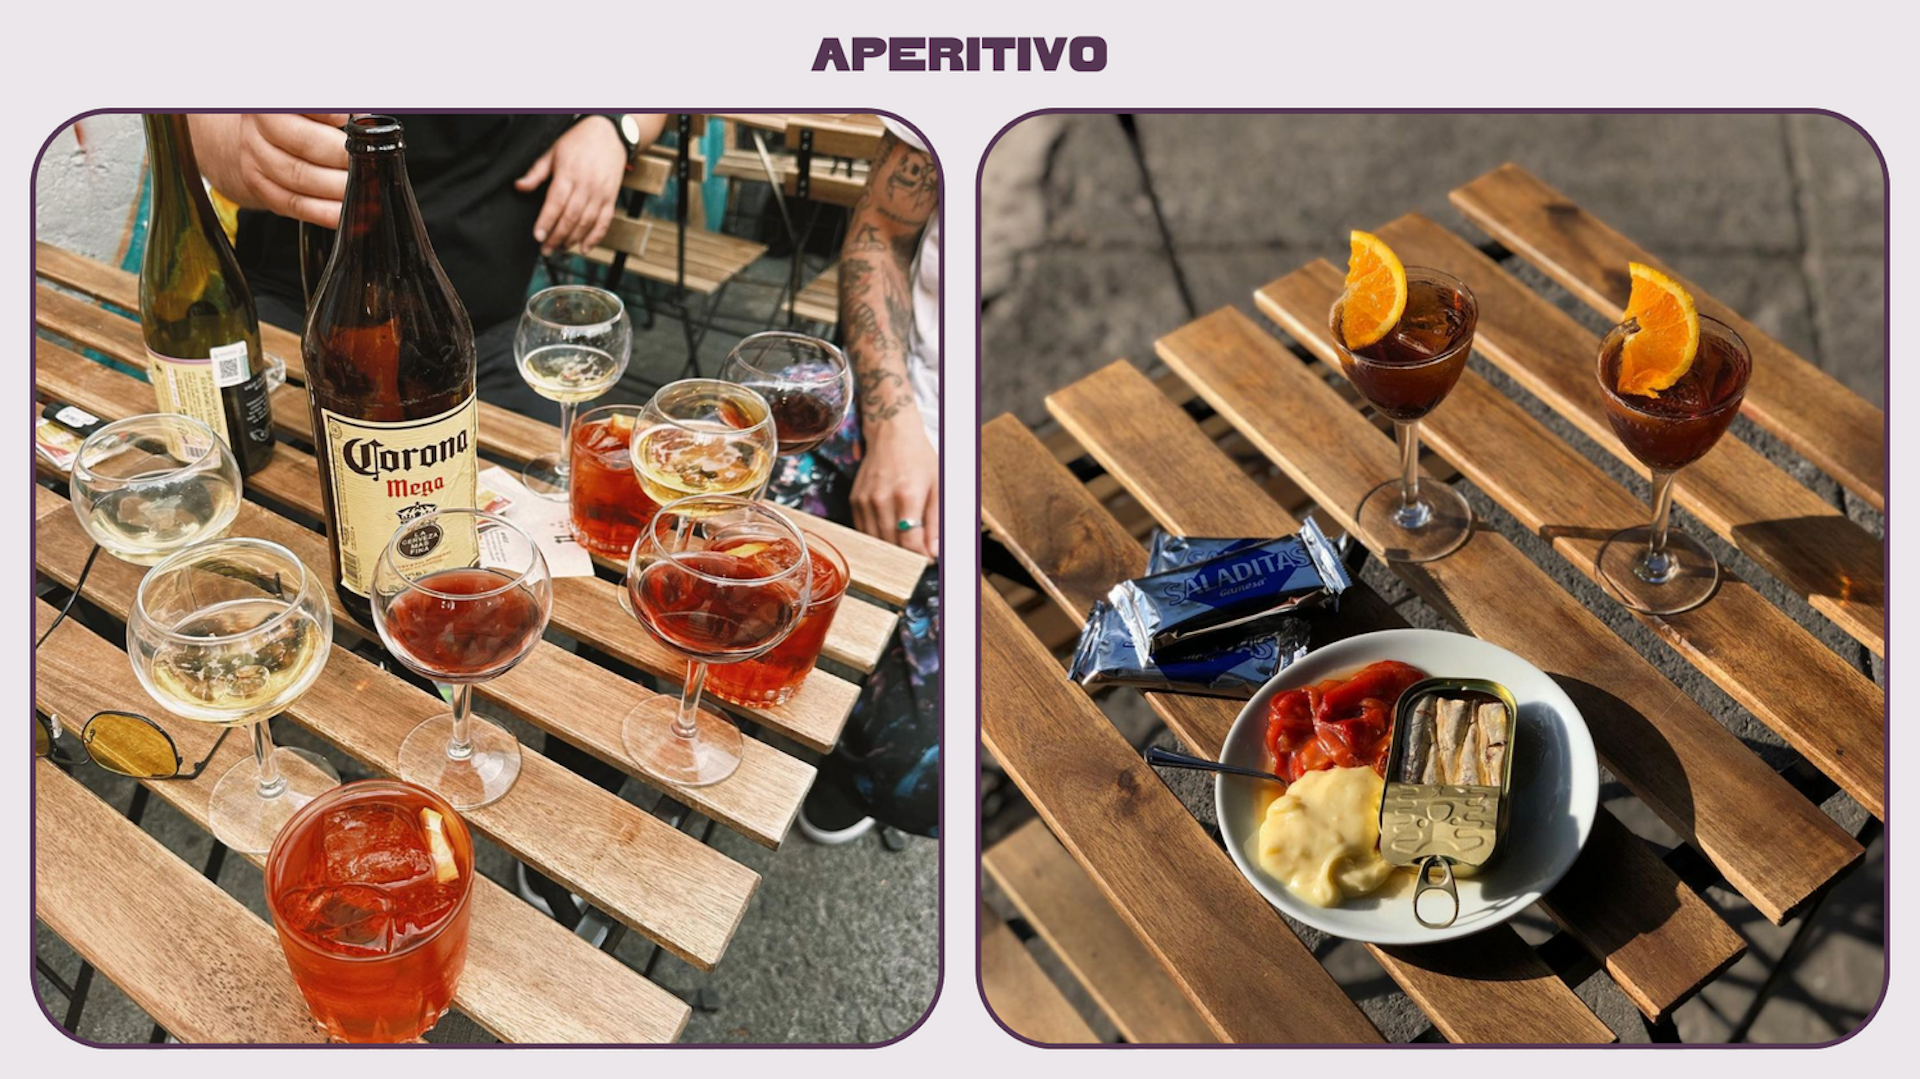 Glasses of wine and negronis are placed alongside dishes of tinned fish on front terrace tables of a Mexico City wine bar